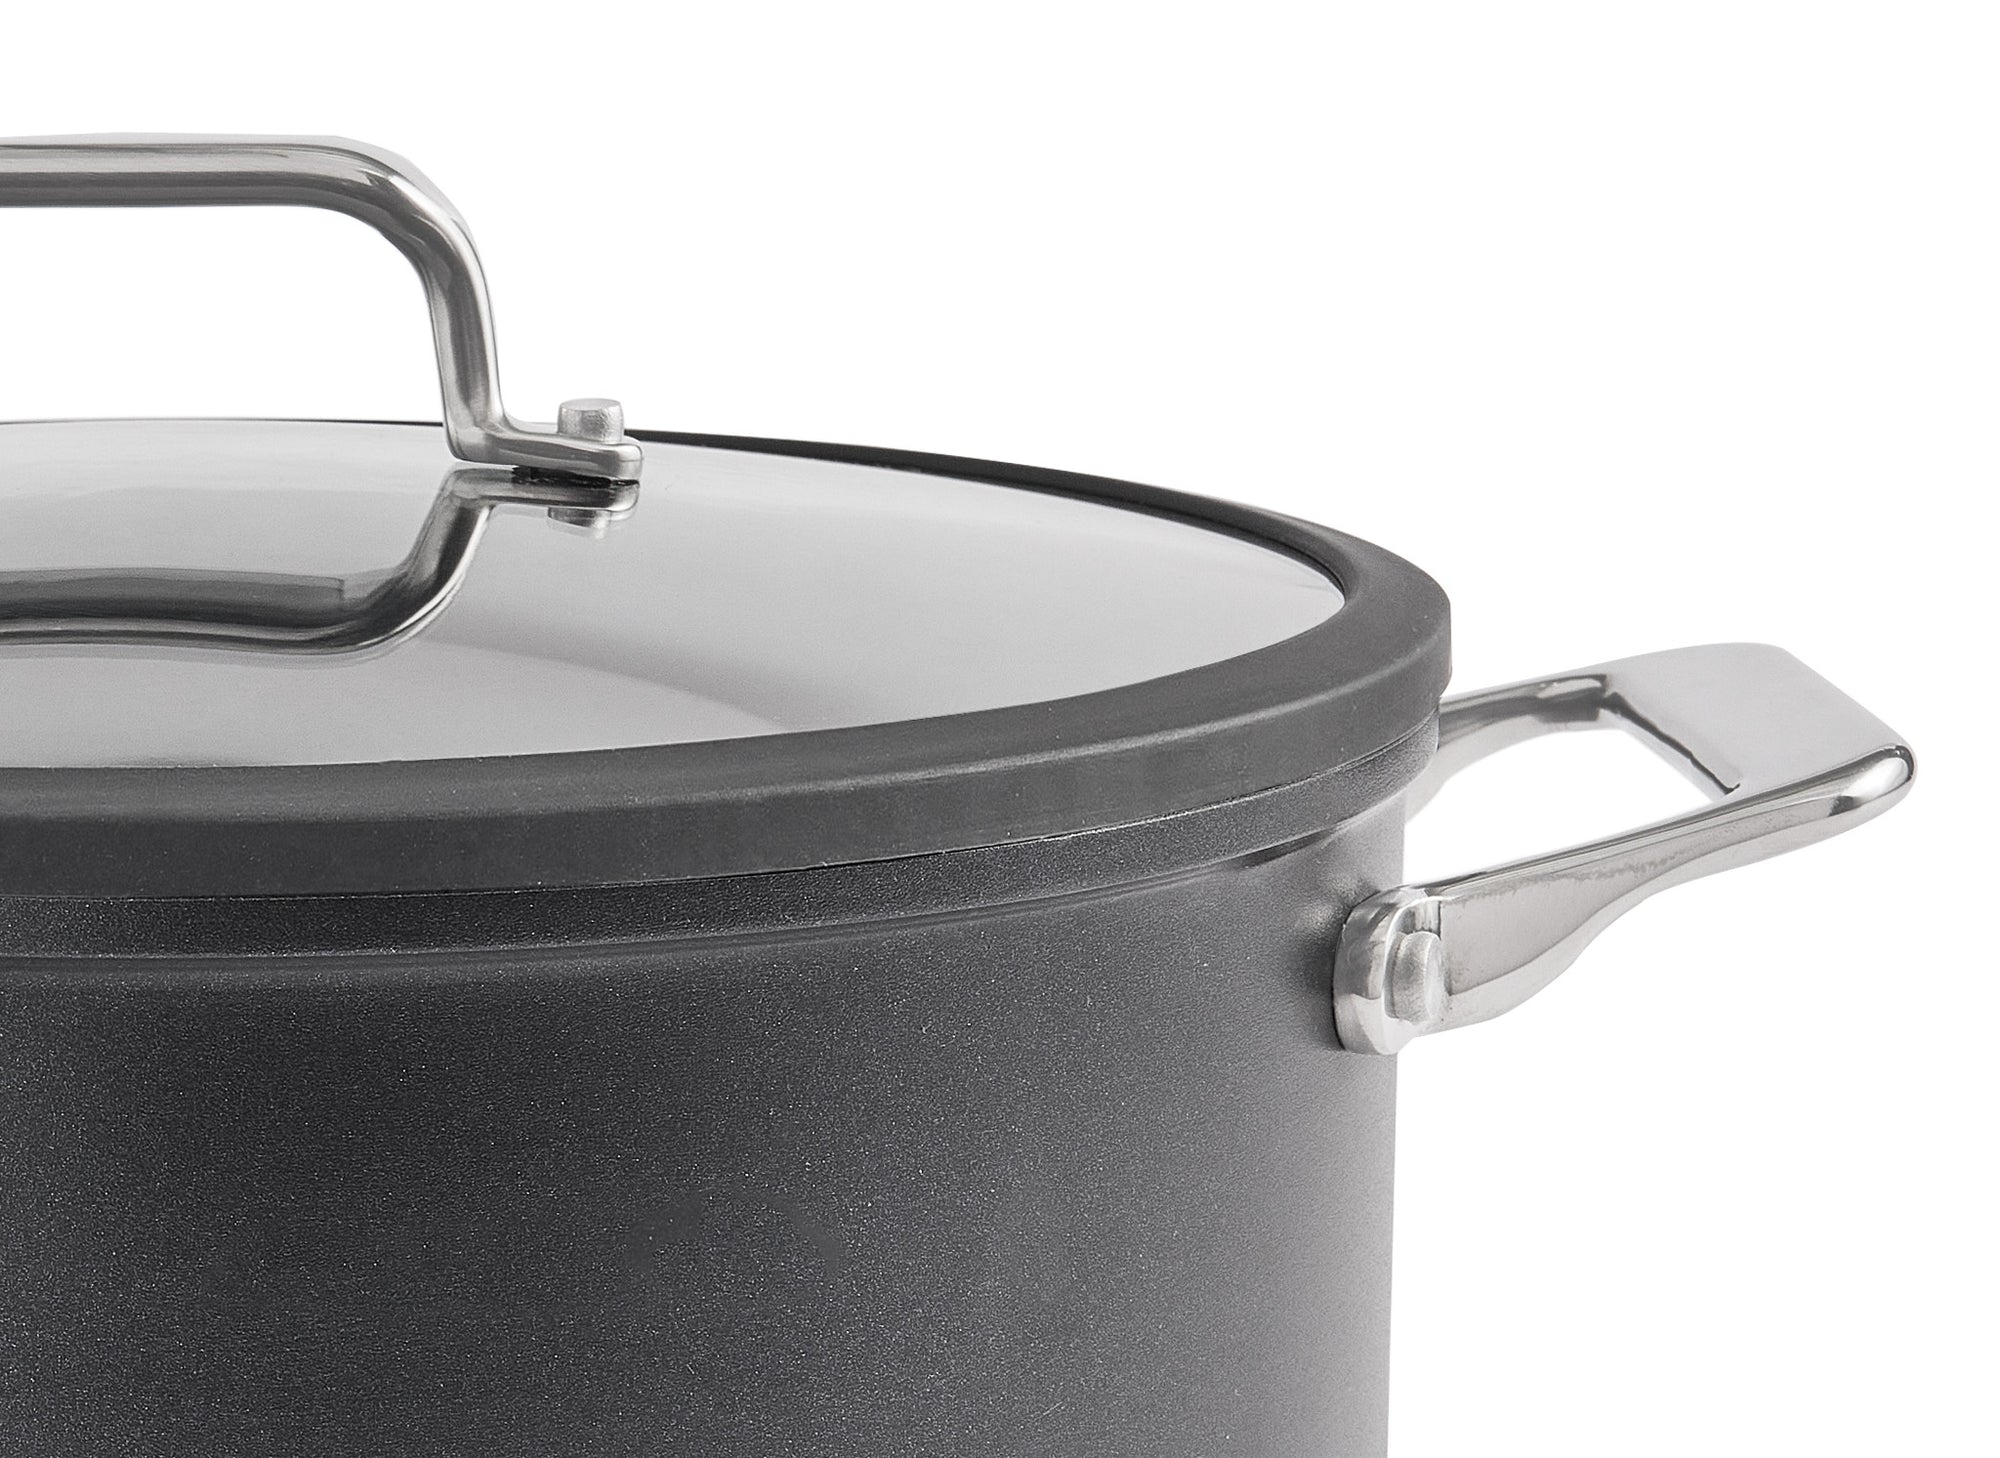 Stockpots & Soup Pots: Stainless Steel & Nonstick